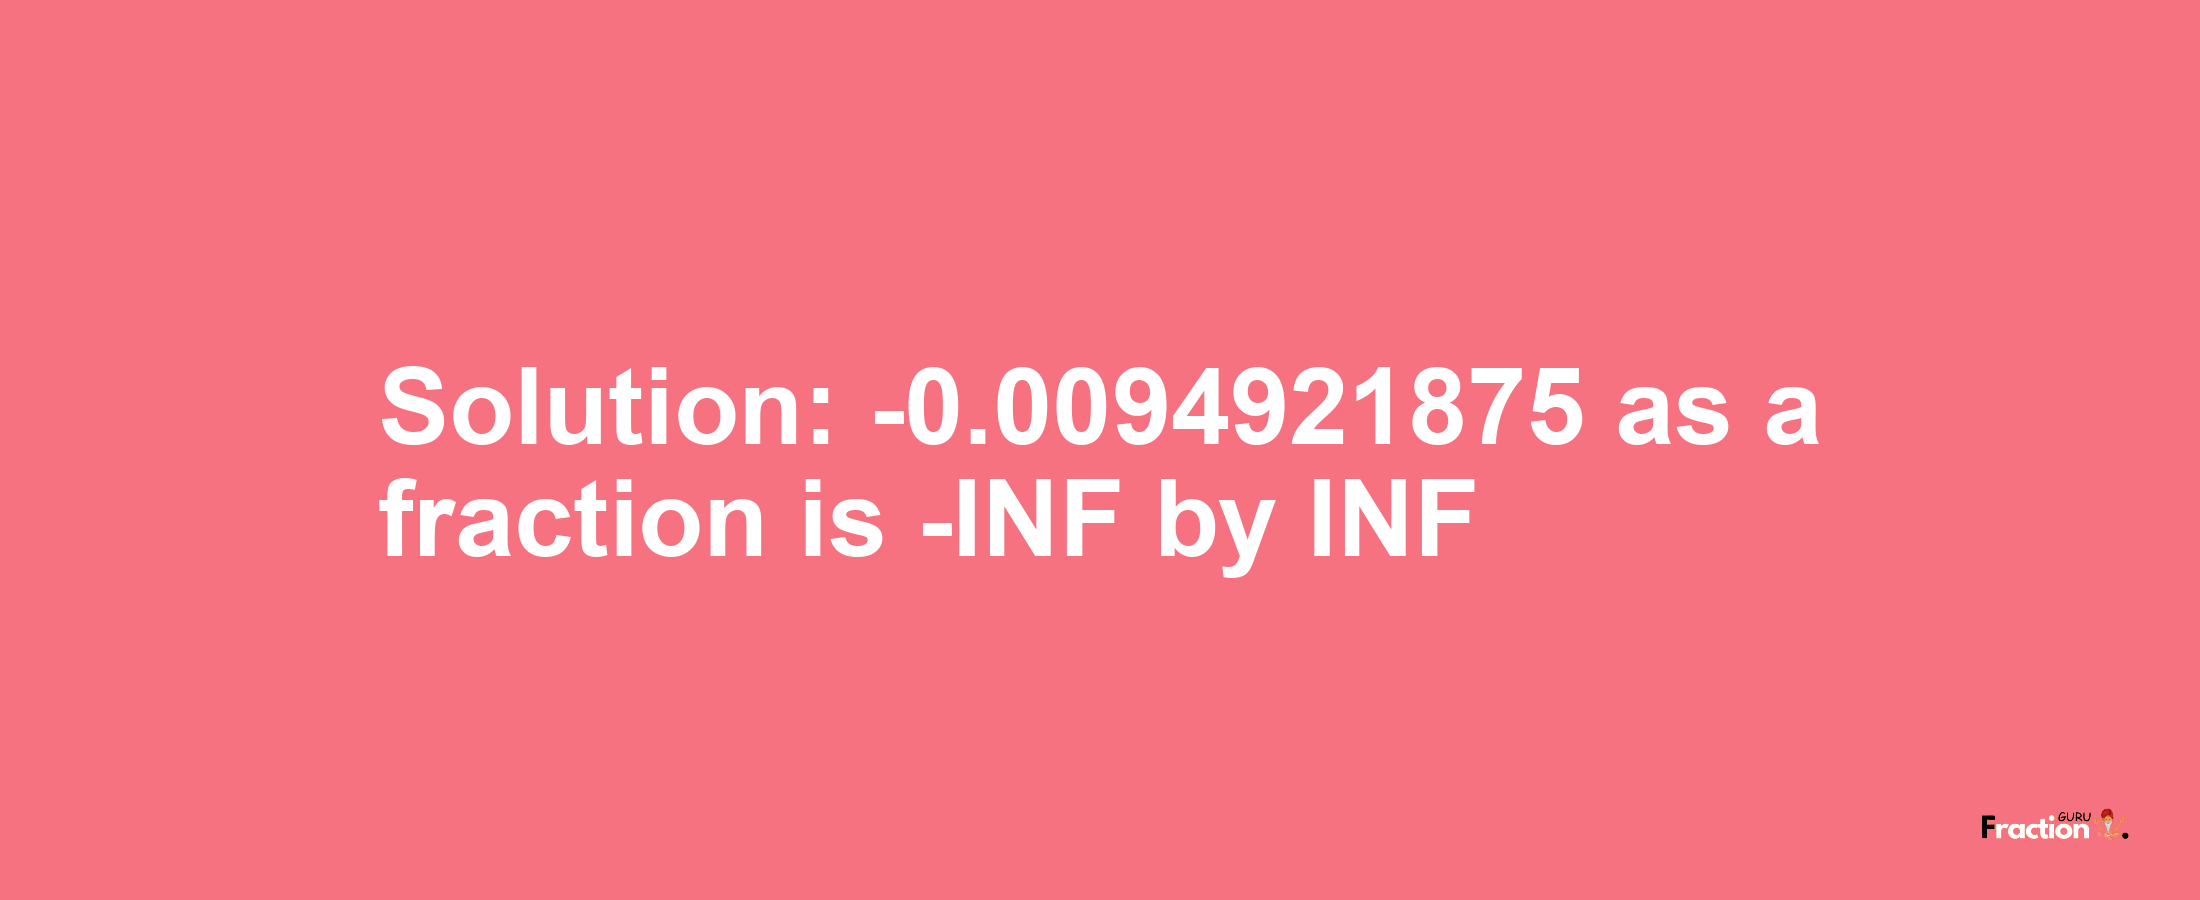 Solution:-0.0094921875 as a fraction is -INF/INF